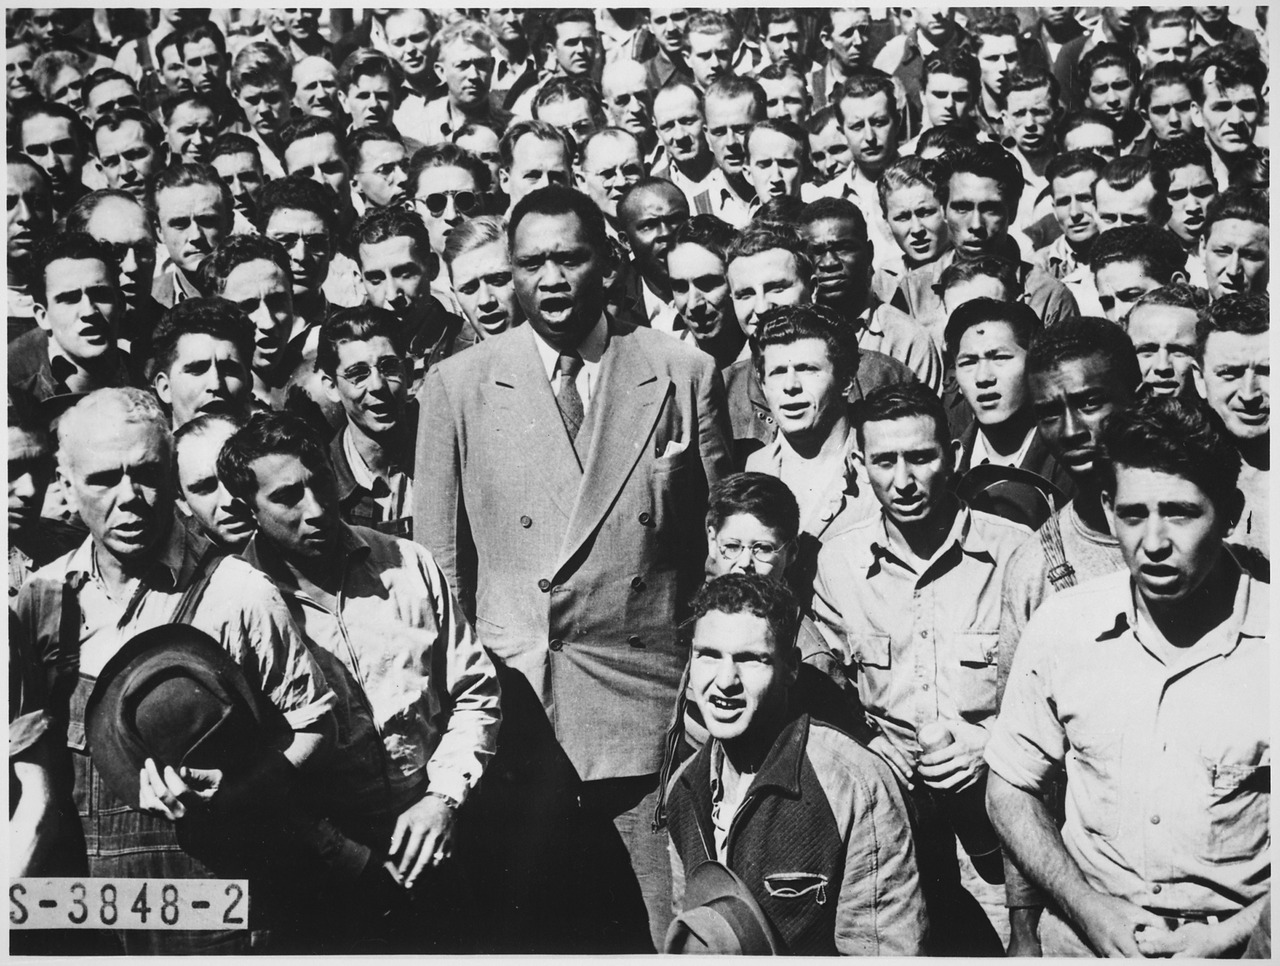 A Black man stands in the middle of a crowd, leading it in song